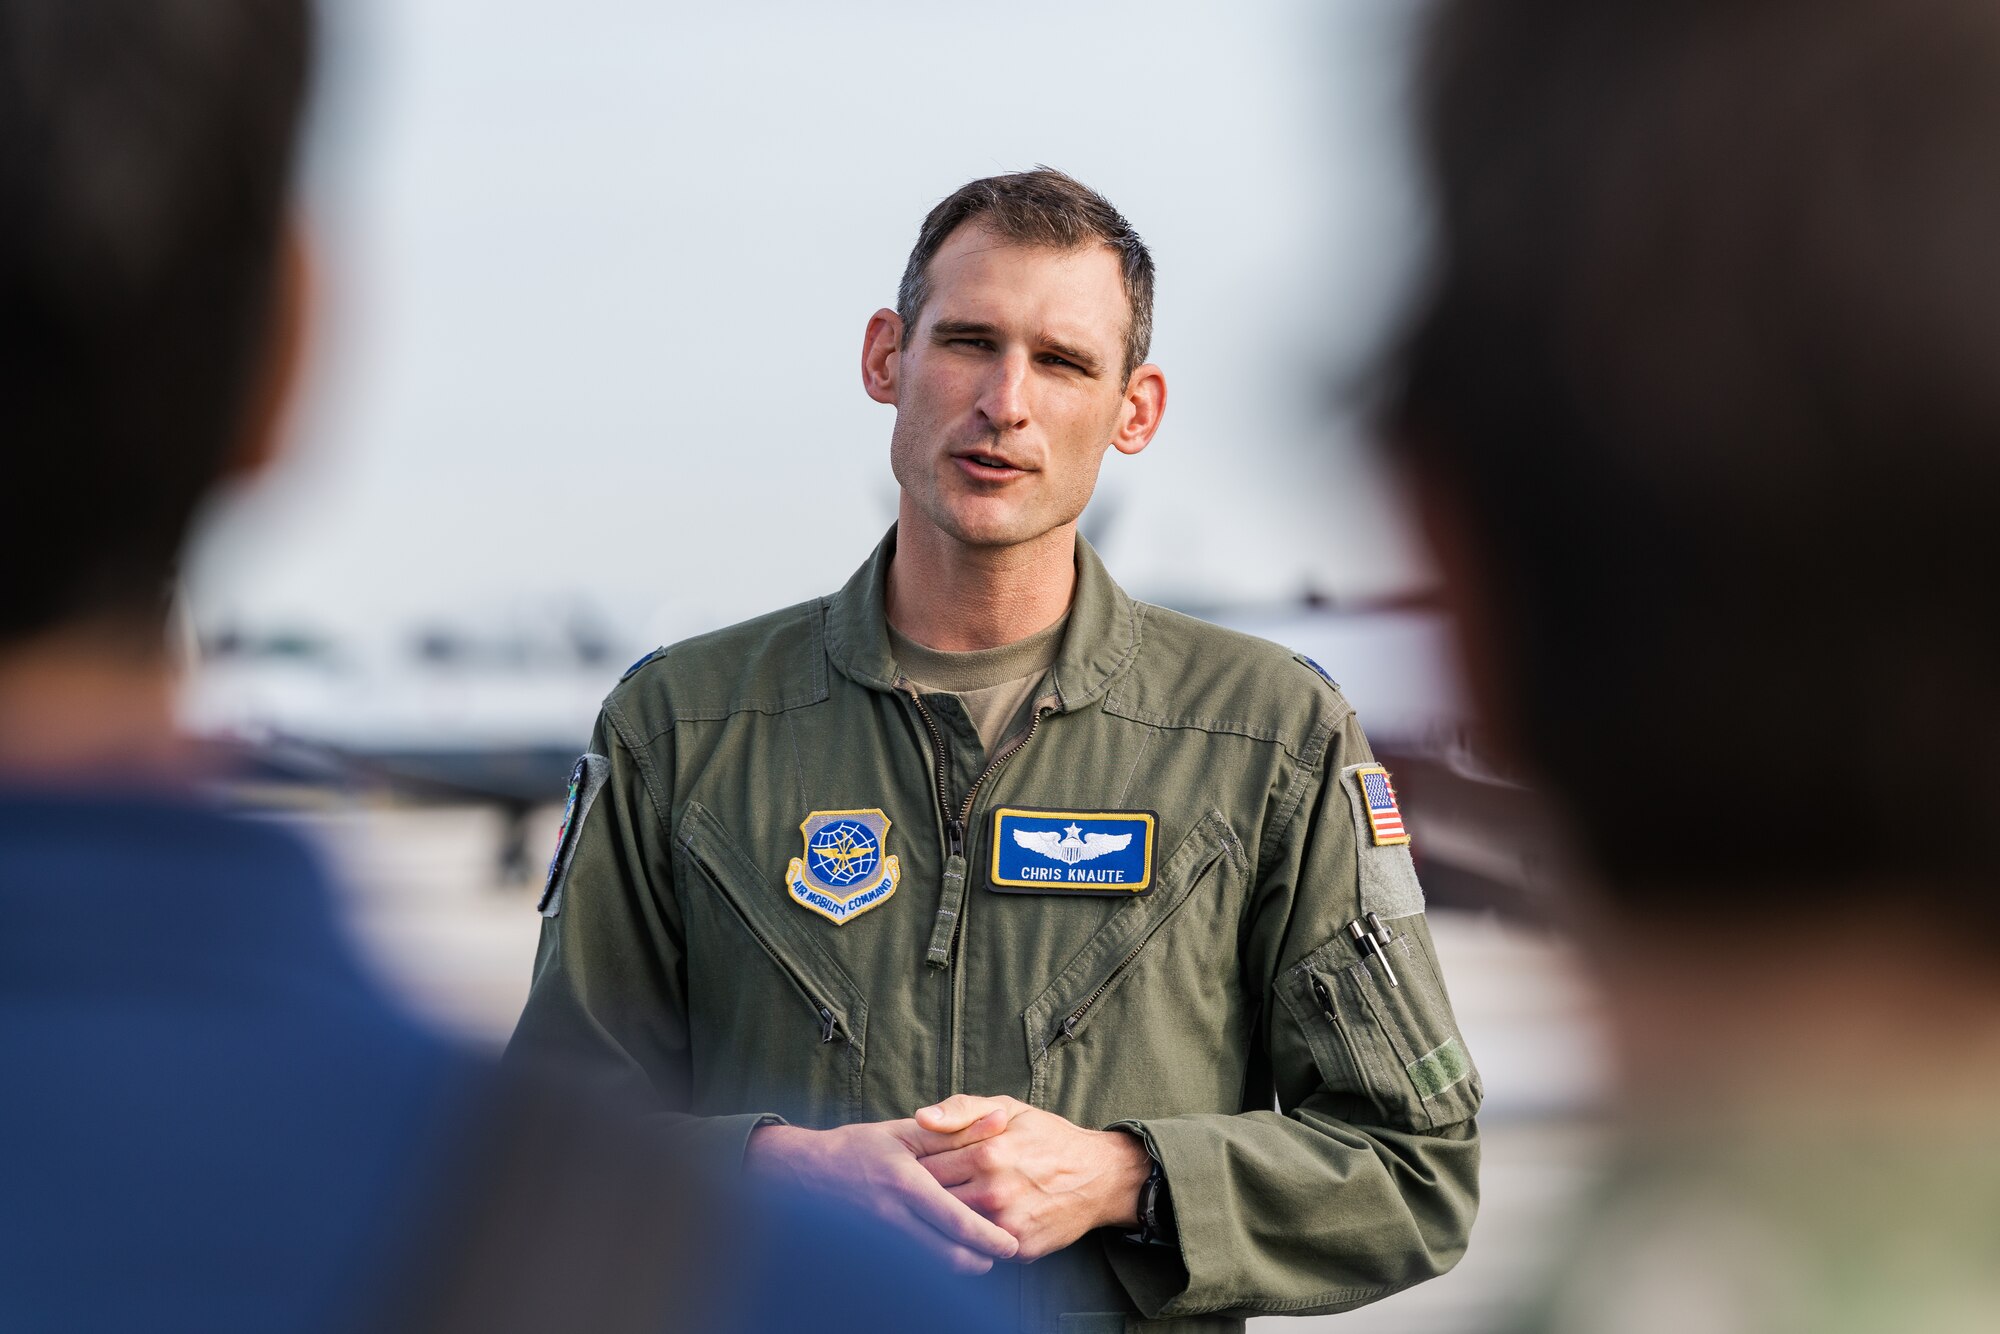 U.S. Air Force Lt. Col. Chris Knaute, 91st Air Refueling Squadron director of operations, speaks during an Aviation Inspiration Mentorship event at MacDill Air Force Base, Florida, Oct. 15, 2022.